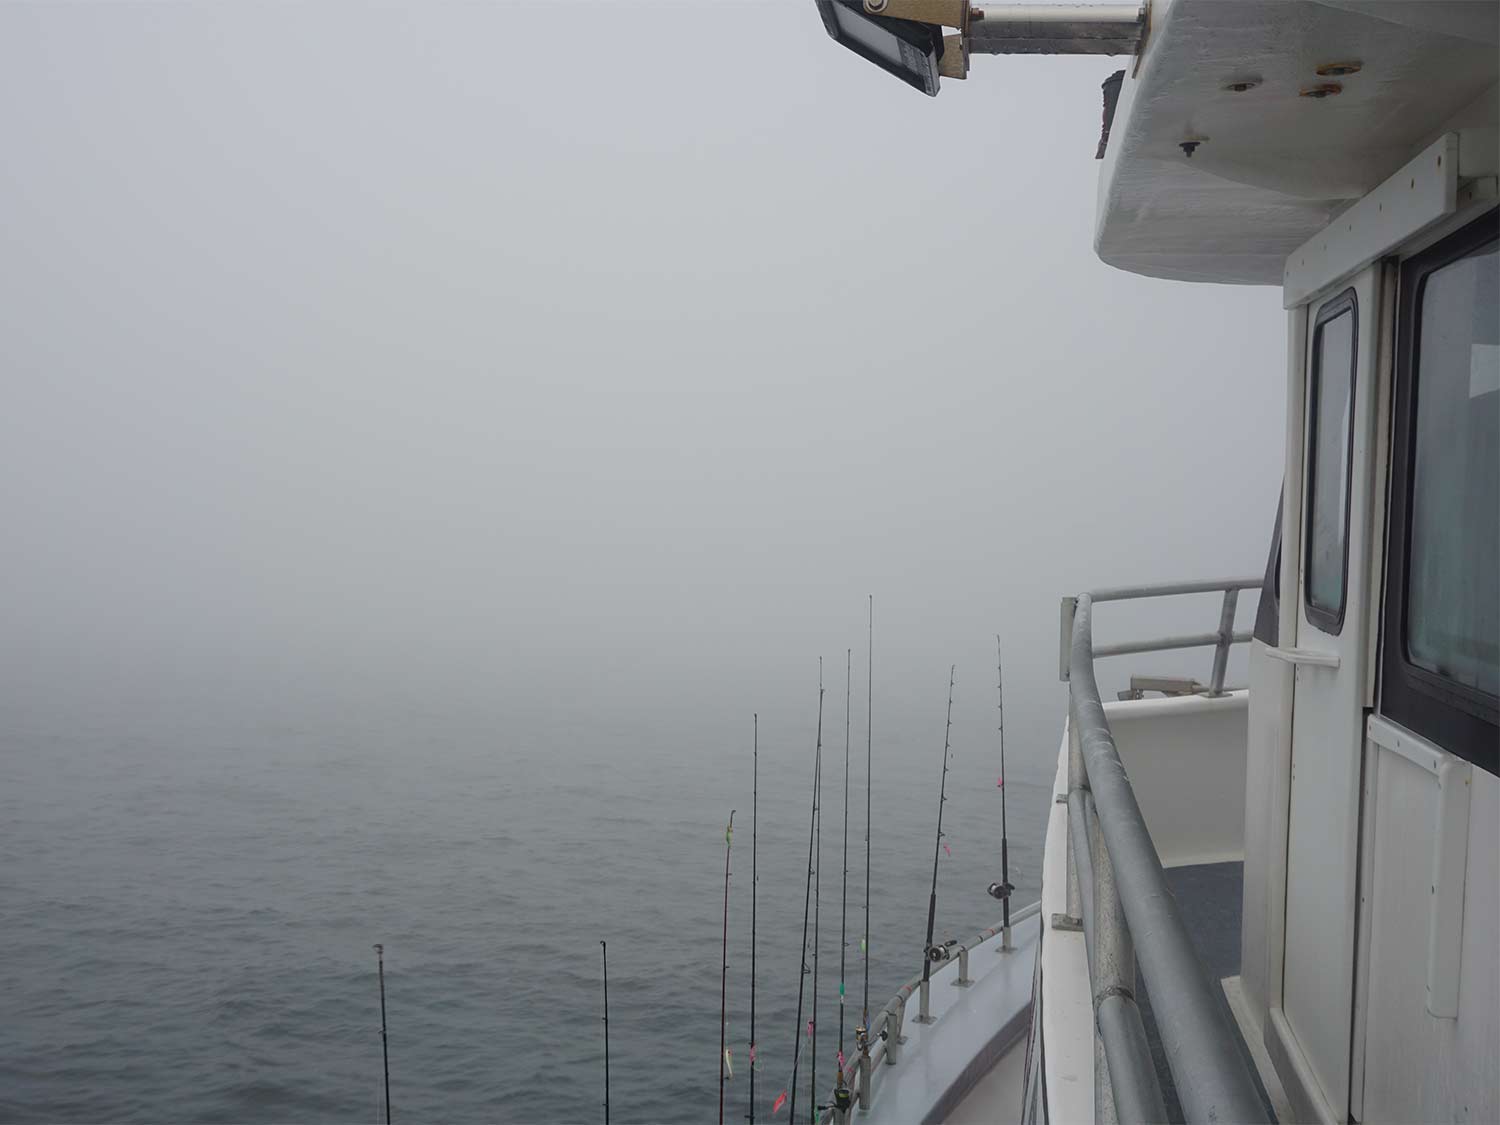 the long island sound filled with fog